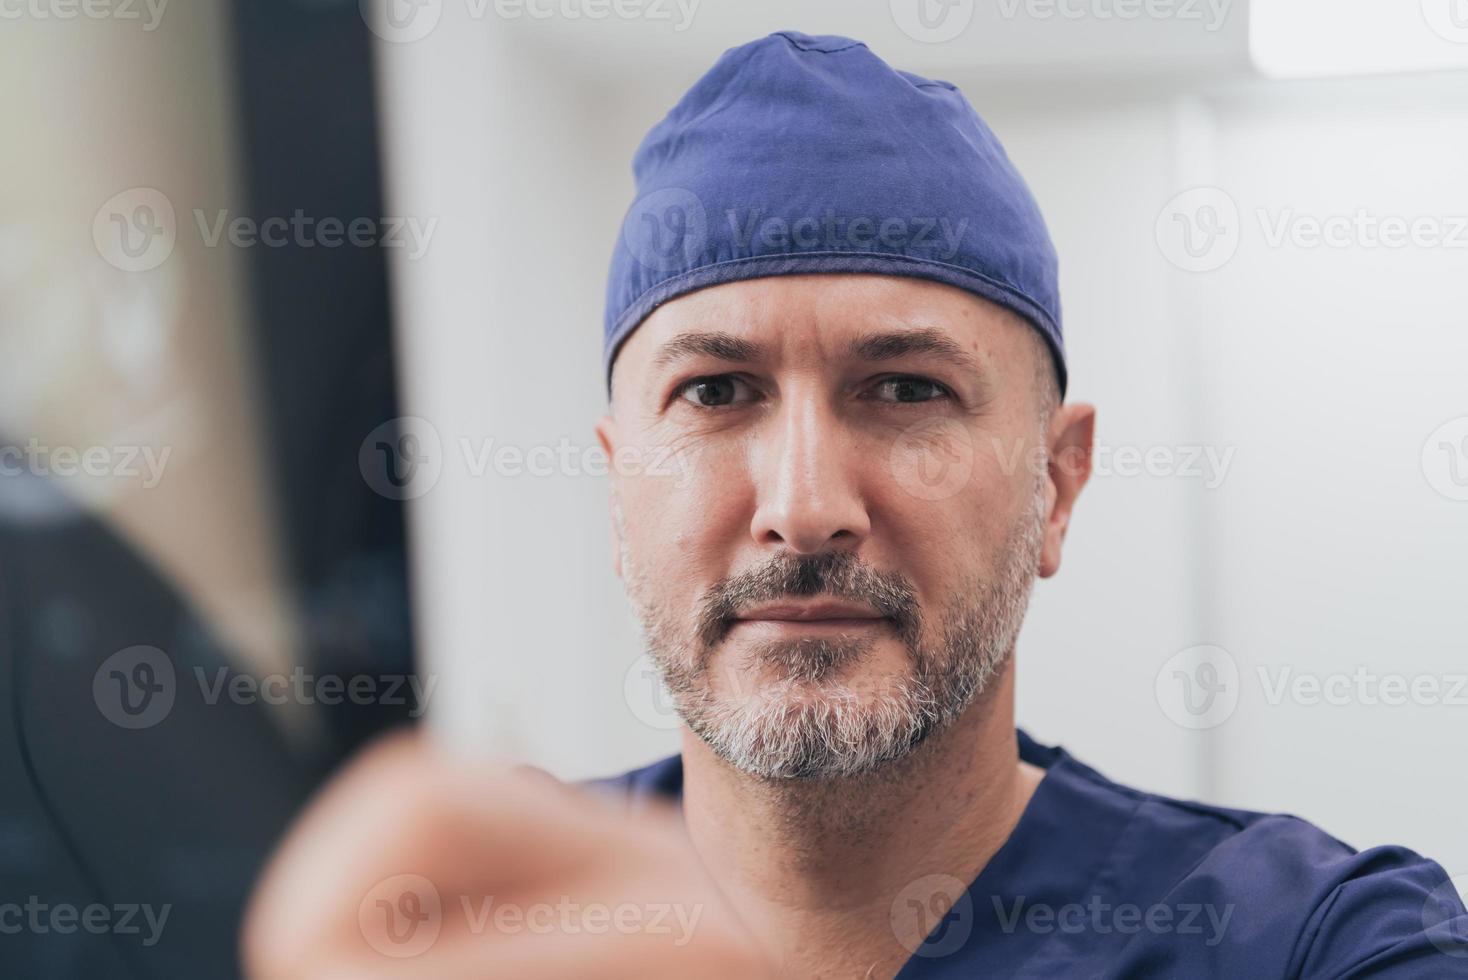 Orthopedist doctor examining X-ray picture in hospital or clinic photo